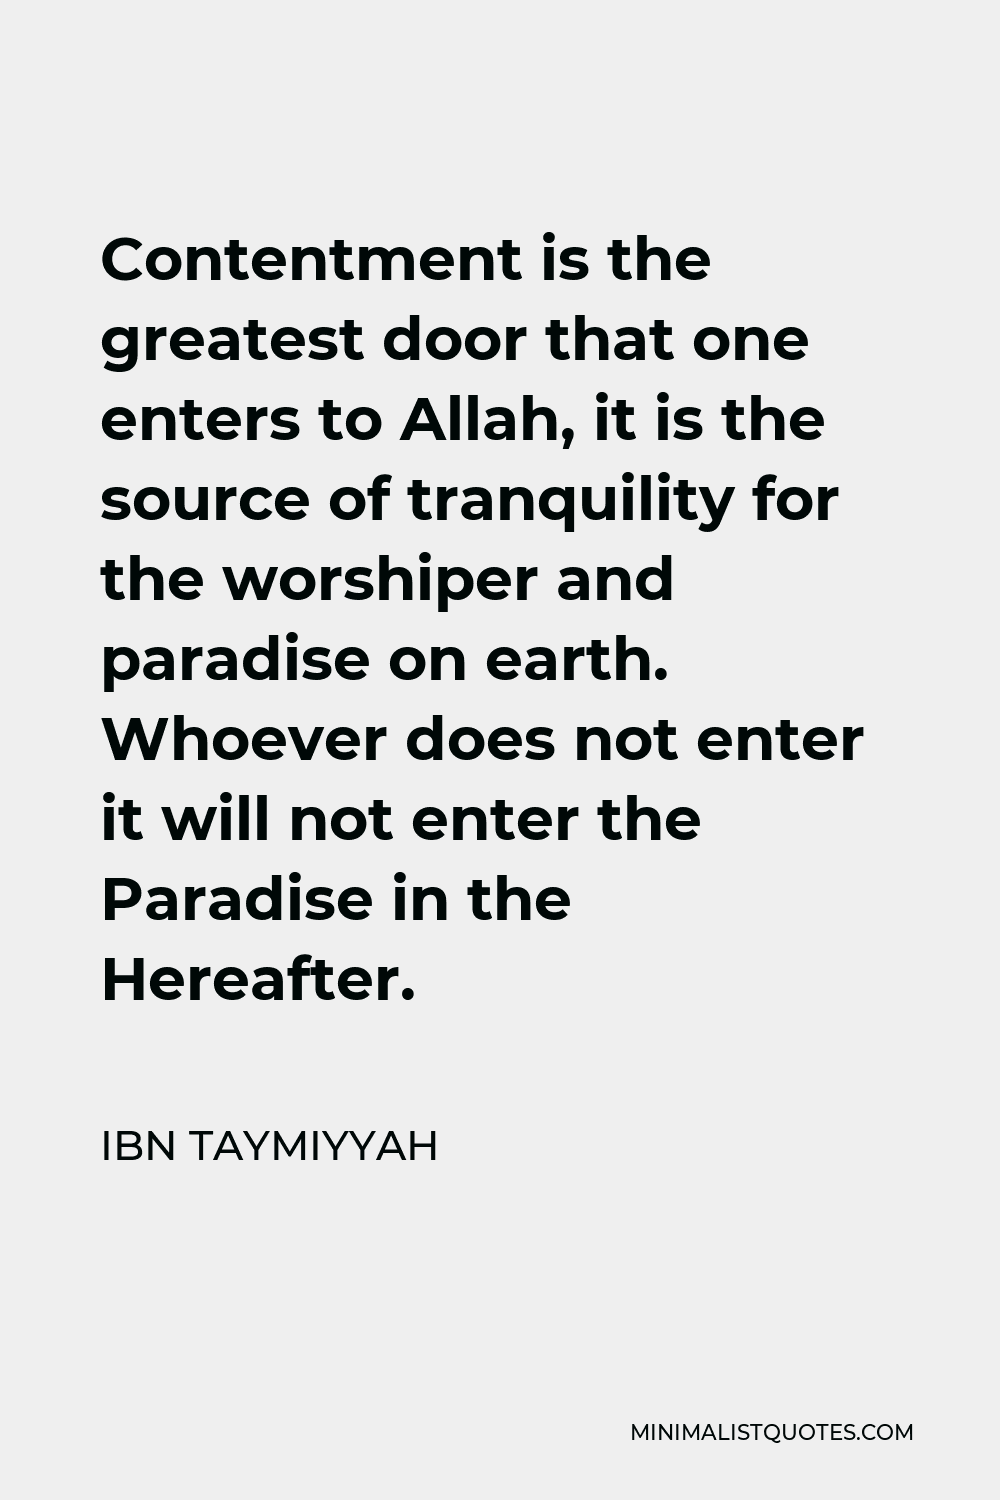 Ibn Taymiyyah Quote - Contentment is the greatest door that one enters to Allah, it is the source of tranquility for the worshiper and paradise on earth. Whoever does not enter it will not enter the Paradise in the Hereafter.